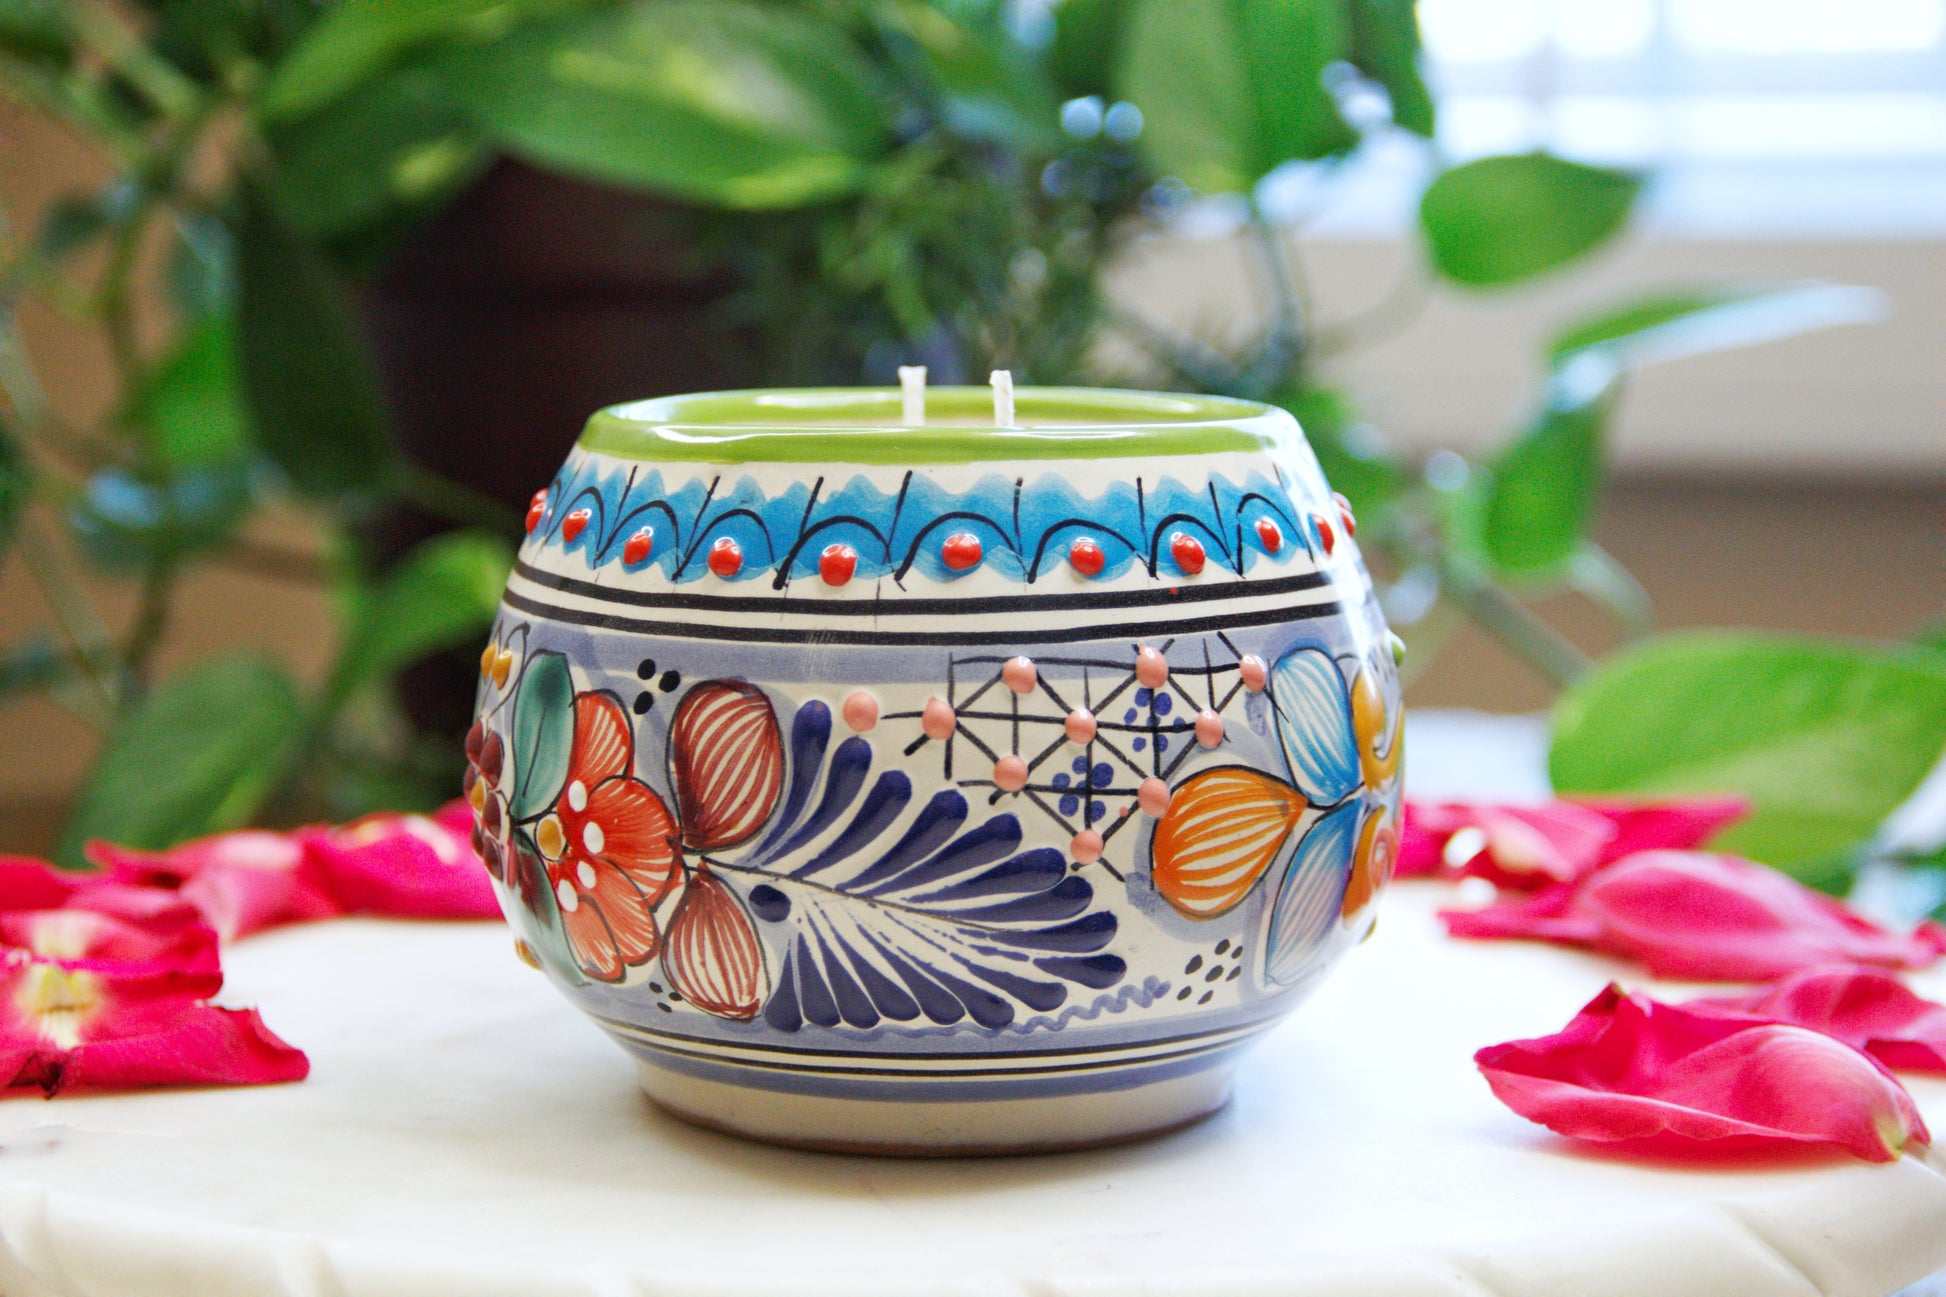 side view of  an Artisanal candle in a beautiful multicolored talavera cup with a handle. Handcrafted by Artisan in Puebla, Mexico. 100% All Natural Soy Candle. Reuse the talavera as home decor or storage.